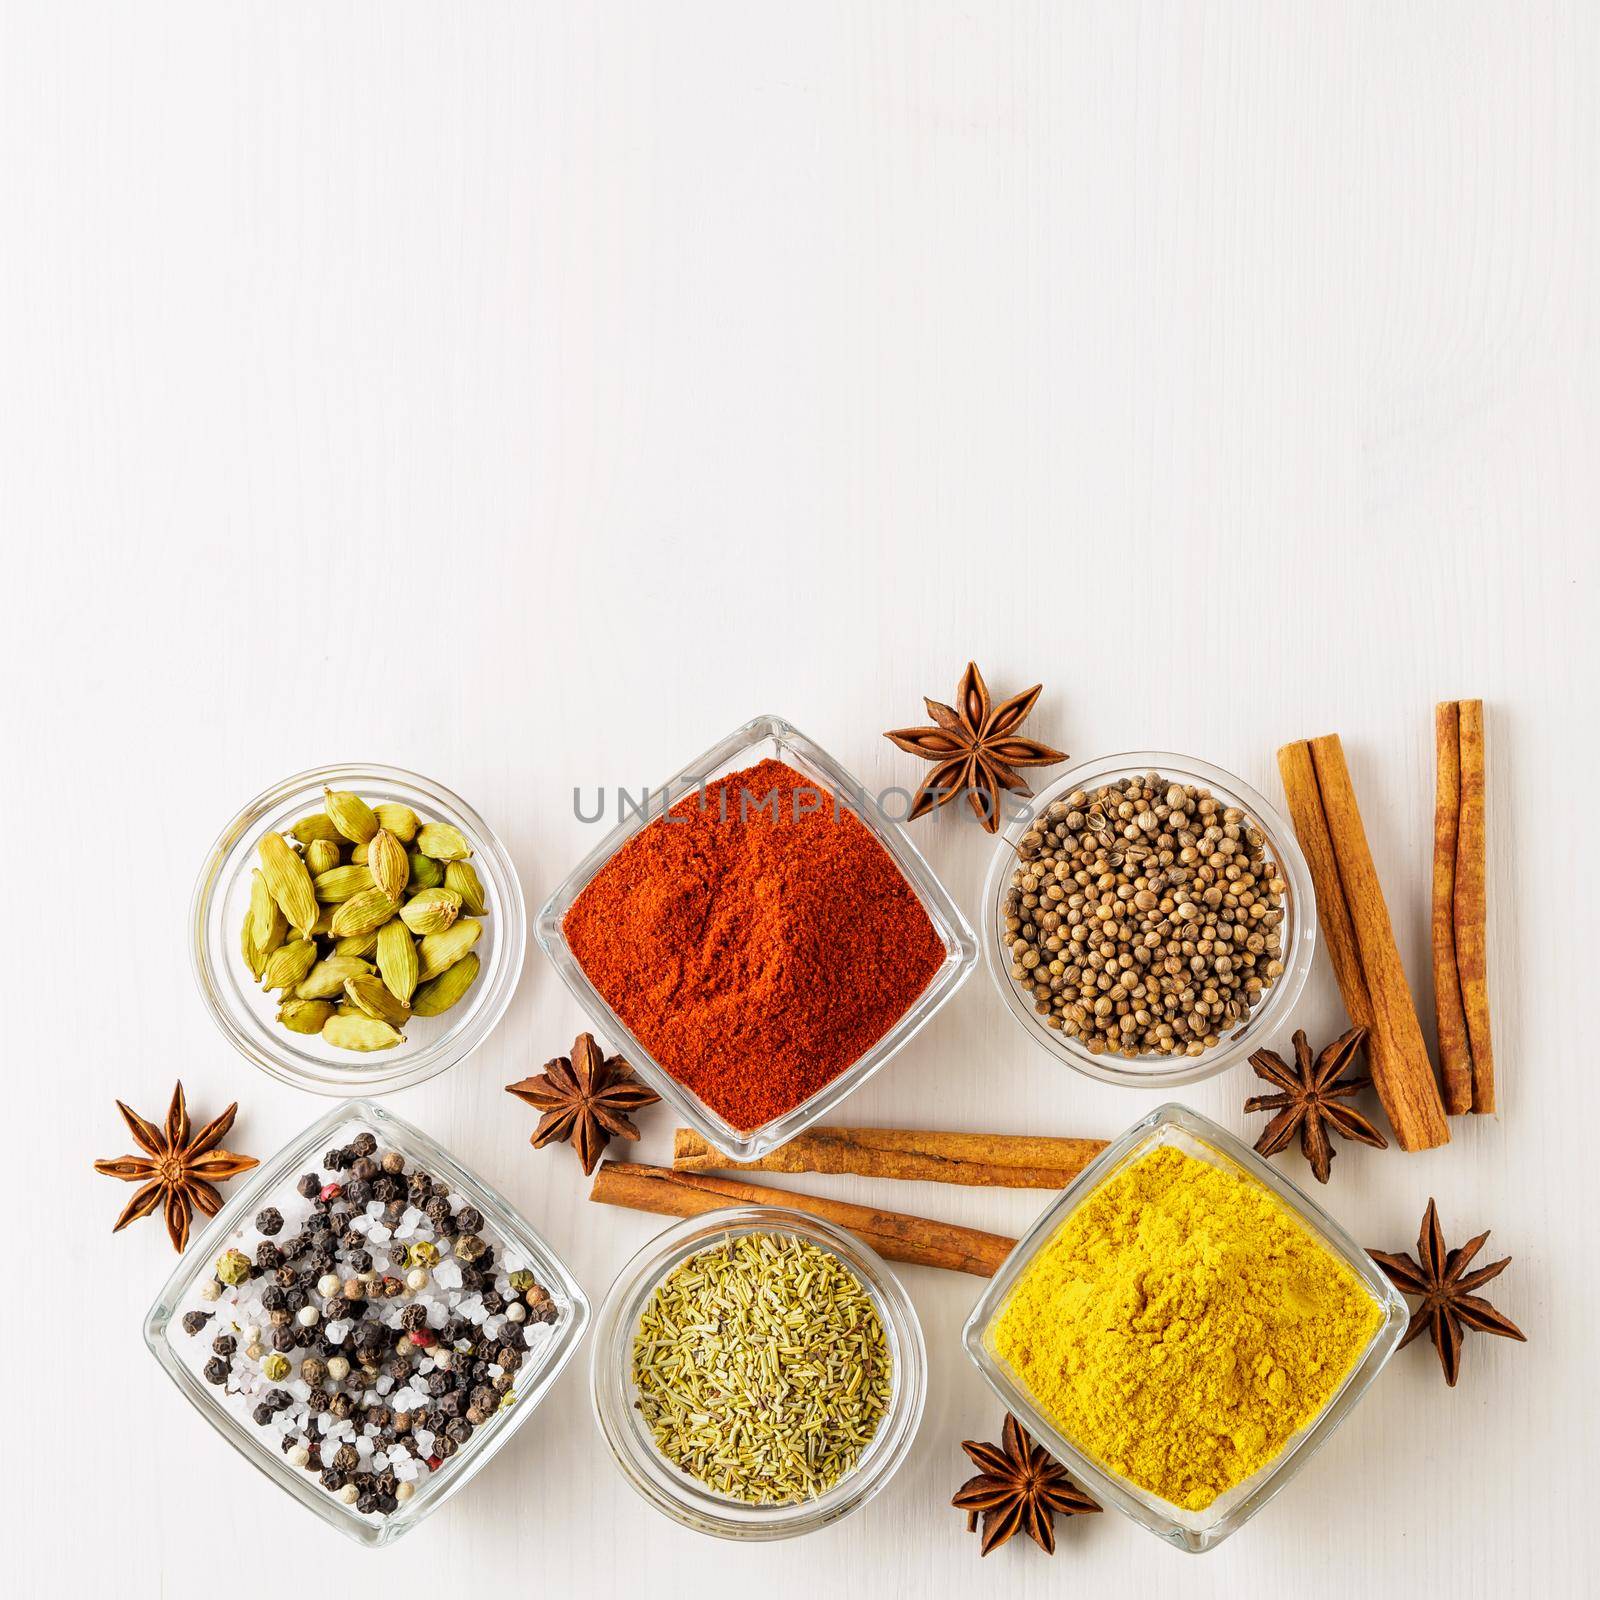 spice set-coriander, red pepper, turmeric, cinnamon, star anise, rosemary various seasonings in glass cups, on white wooden table, top view, blank space for text. by NataBene